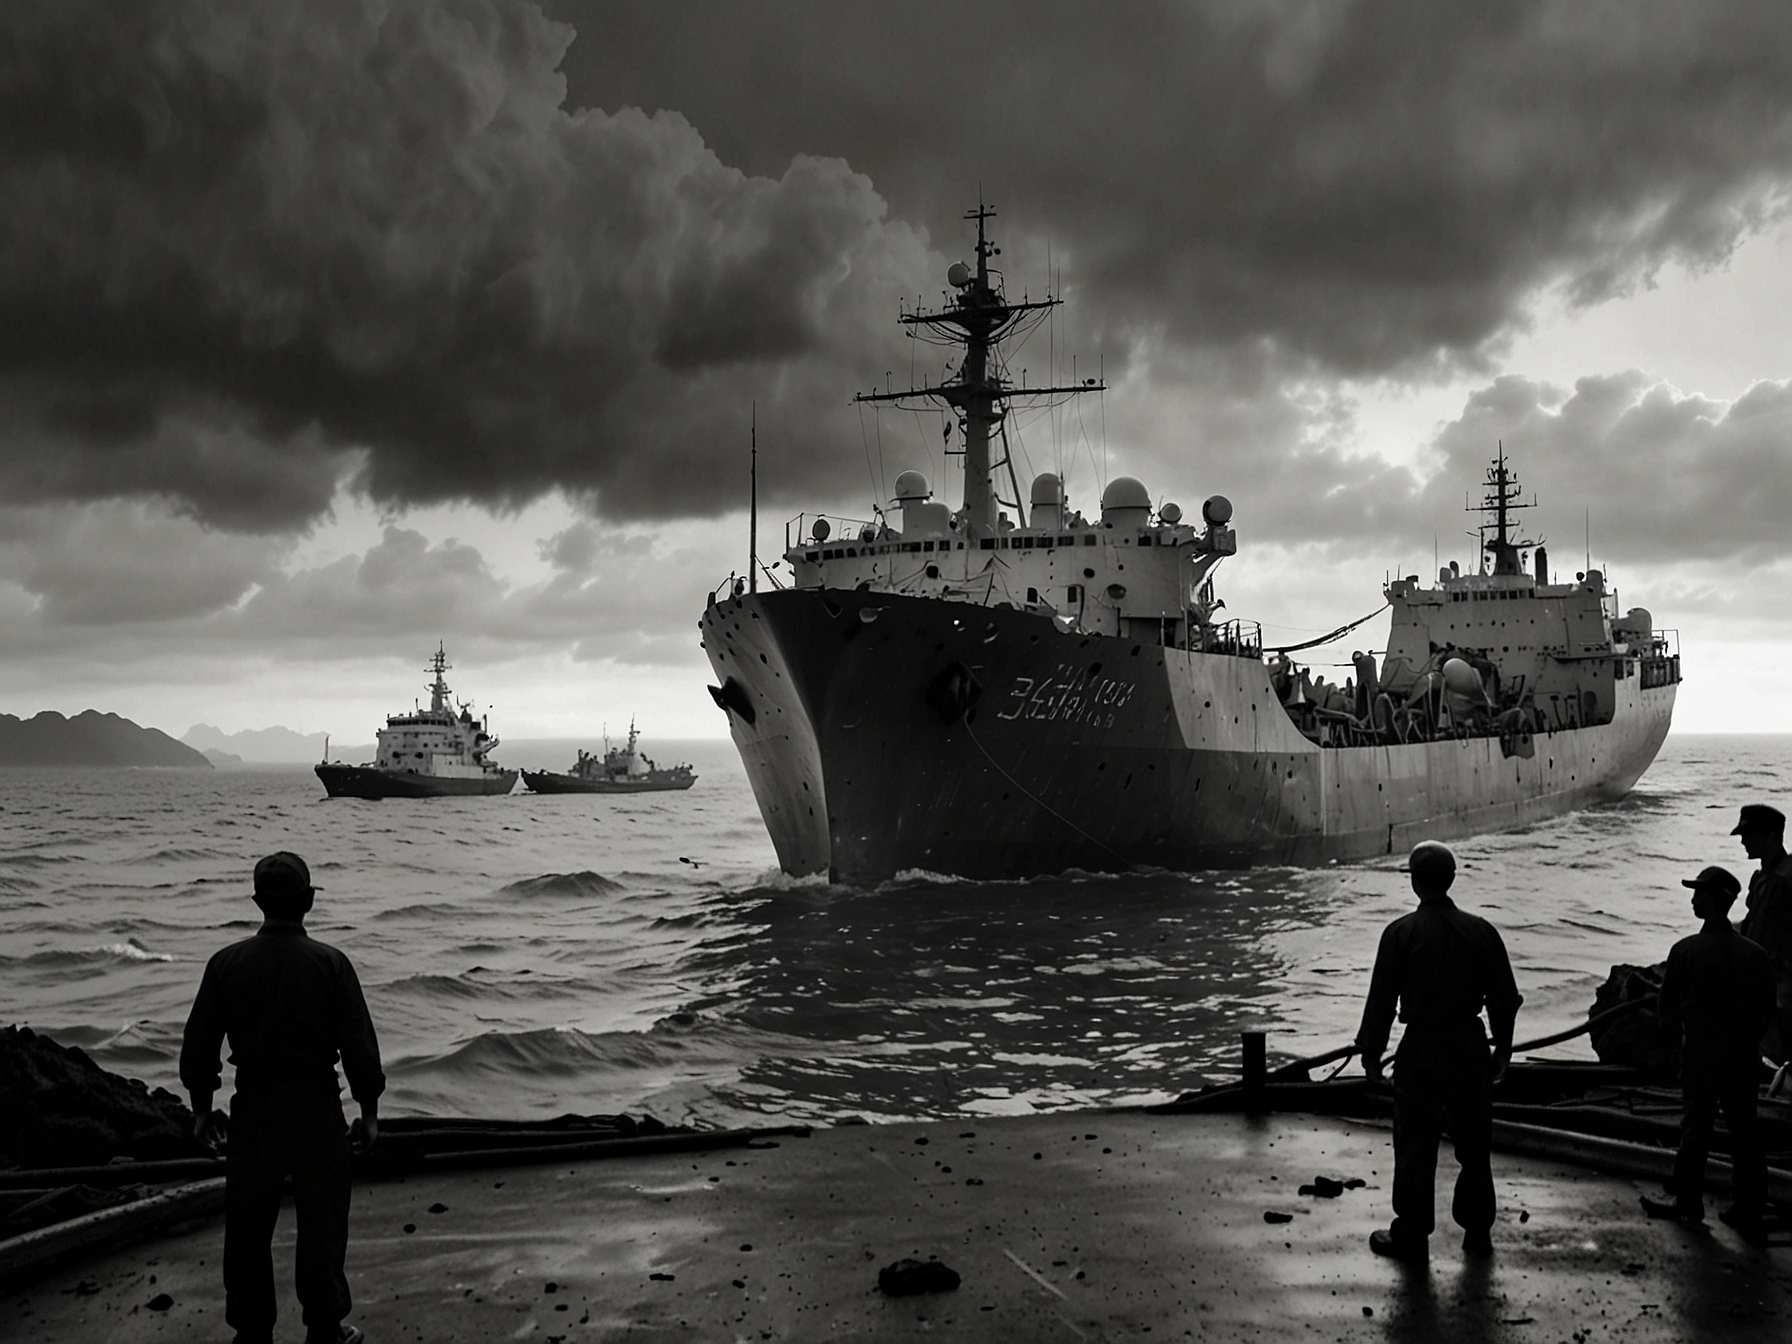 A photograph capturing the aftermath of the collision between the Chinese vessel and the Philippine supply ship, showing damage to both ships and the tense atmosphere as crew members assess the situation.